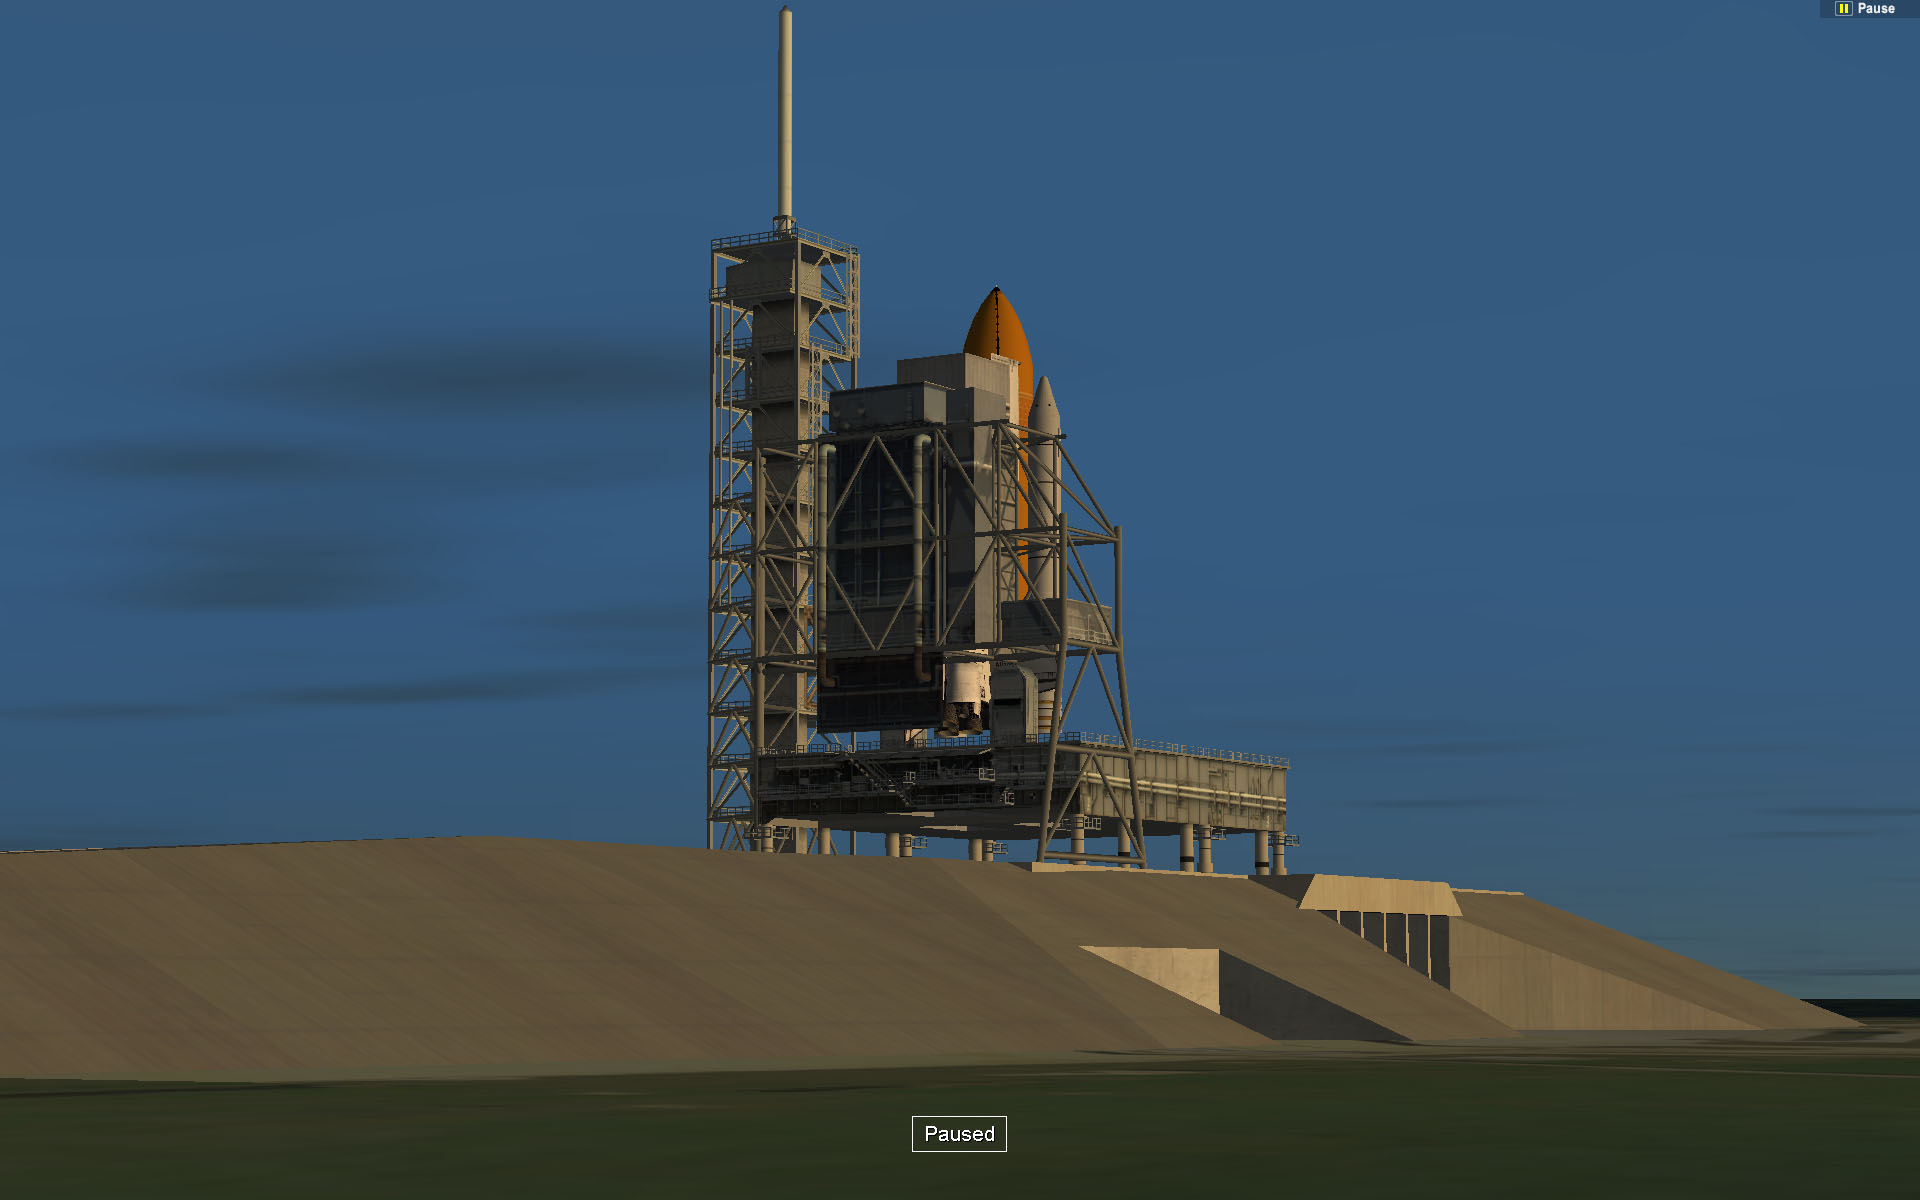 space flight simulator for browser